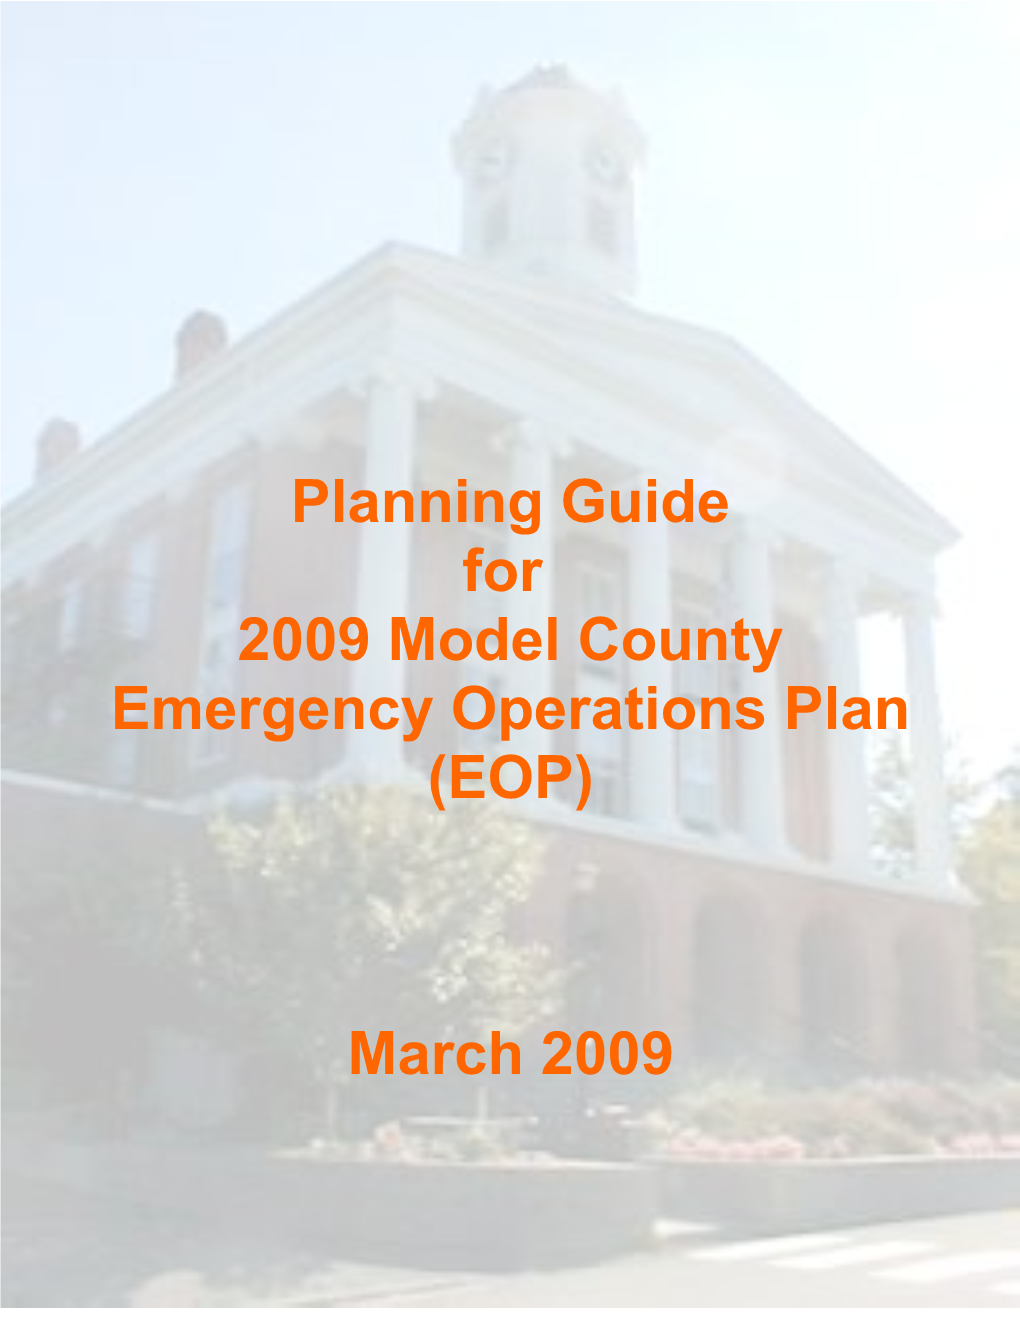 Instructions and Comments for Completing the 2003 Municipal EOP